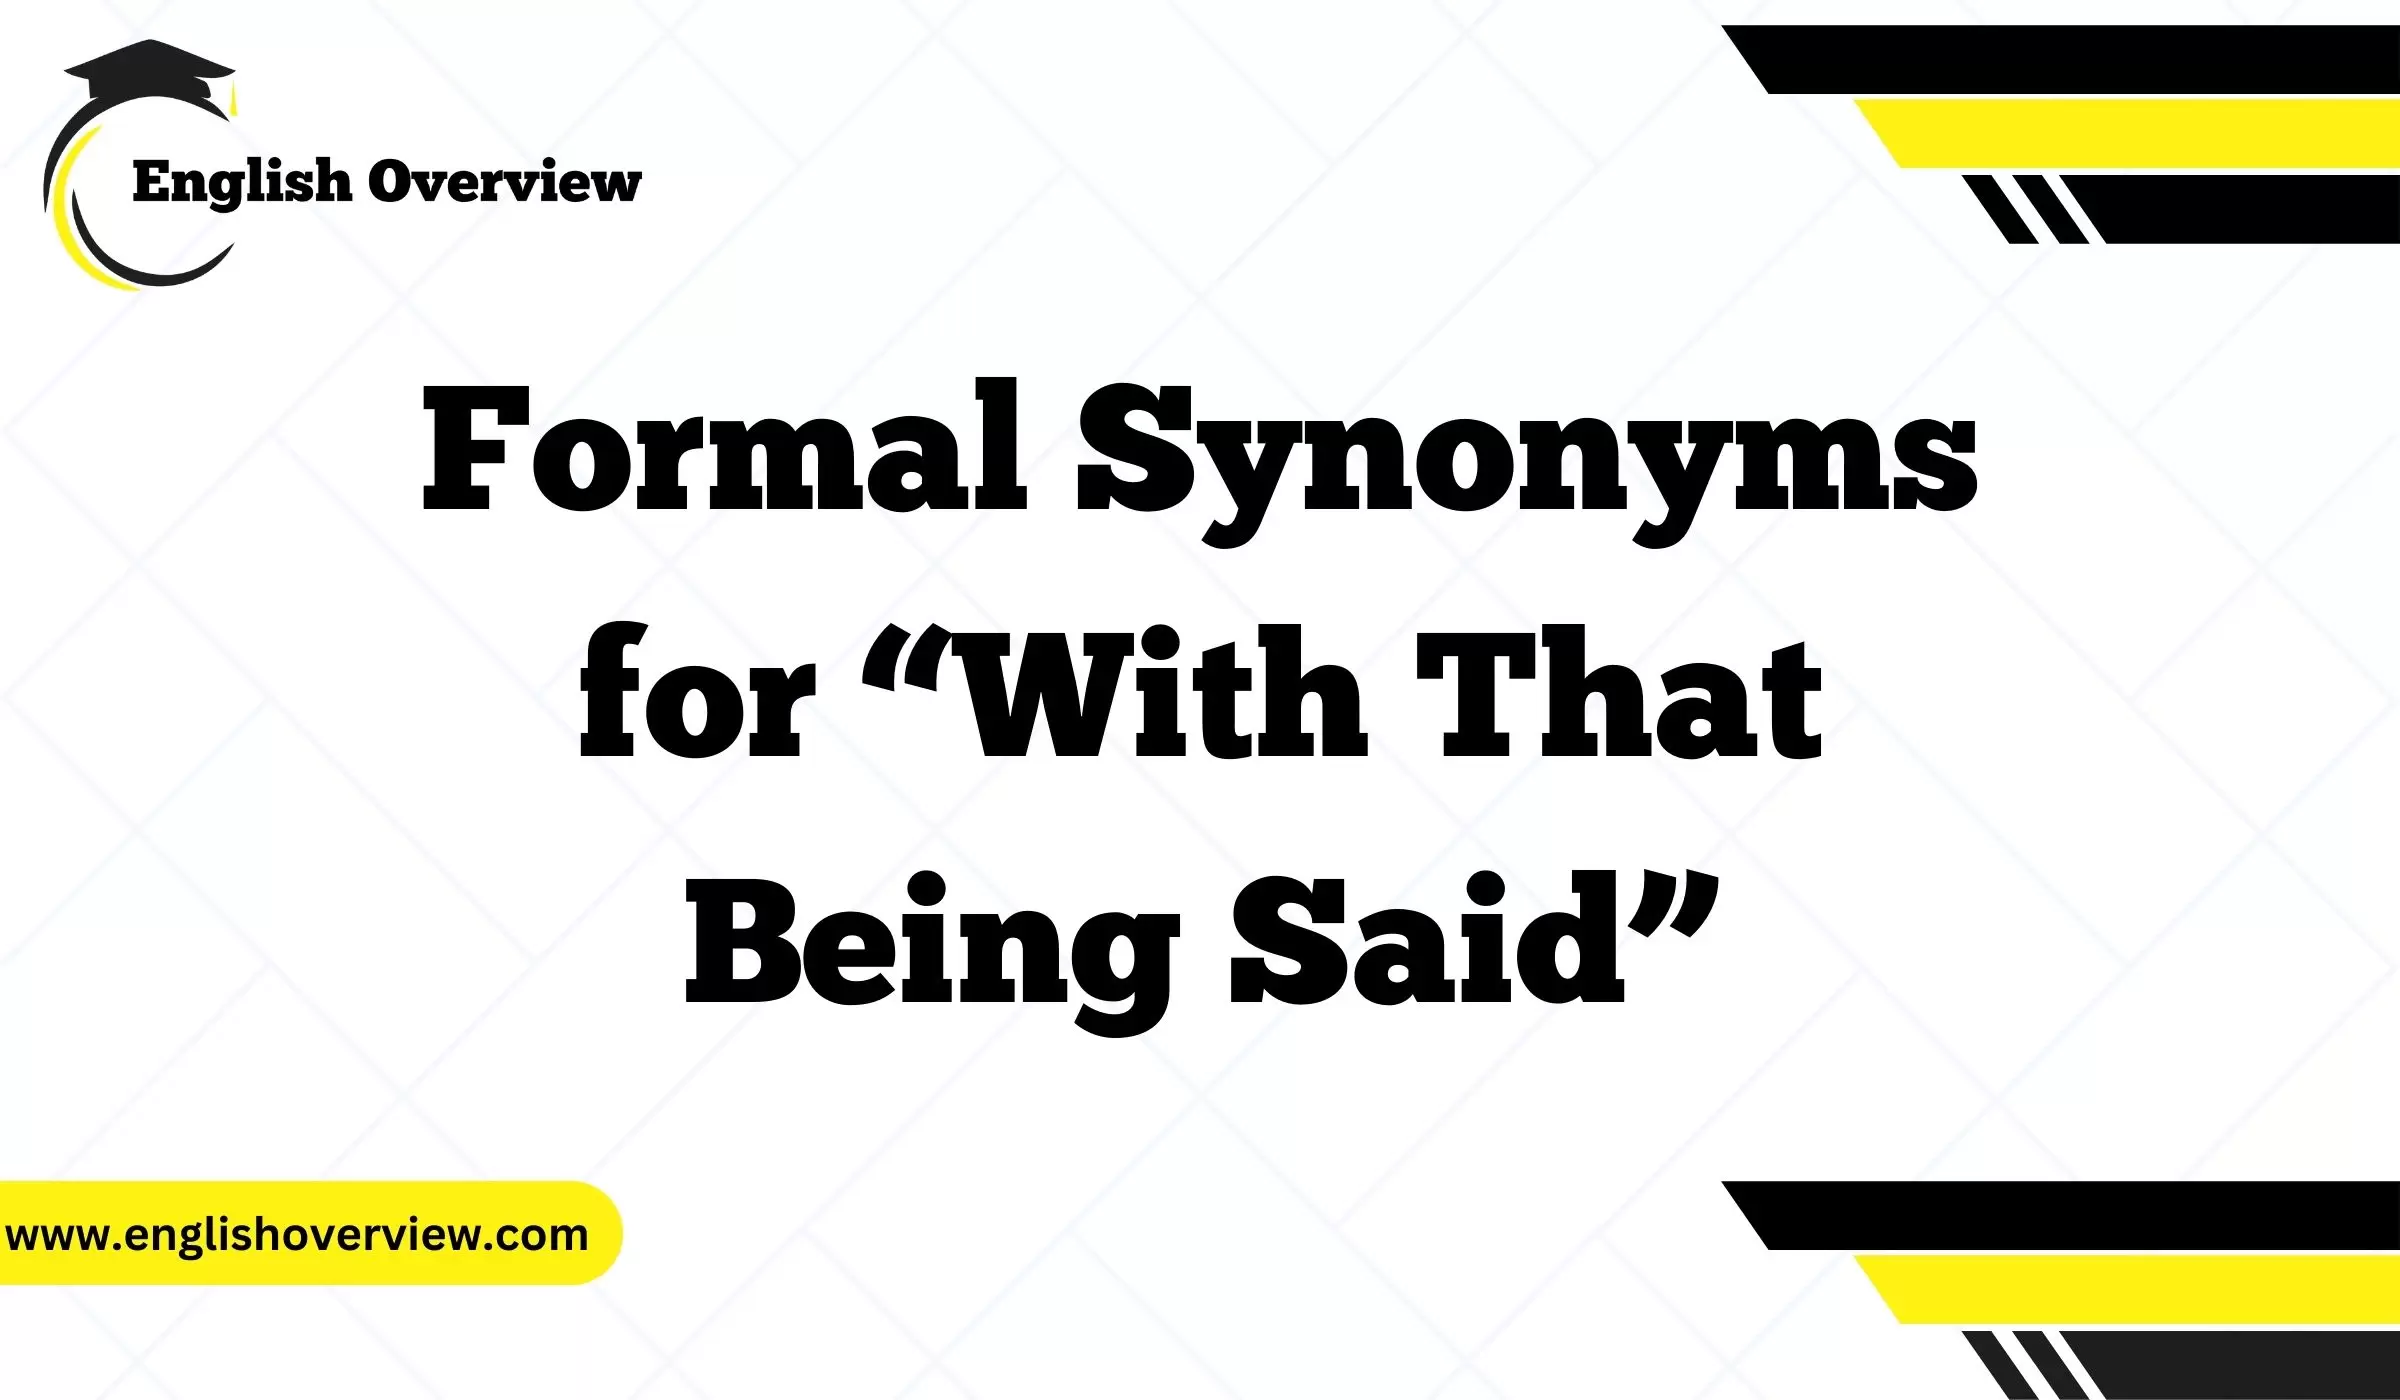 Formal Synonyms for “With That Being Said”